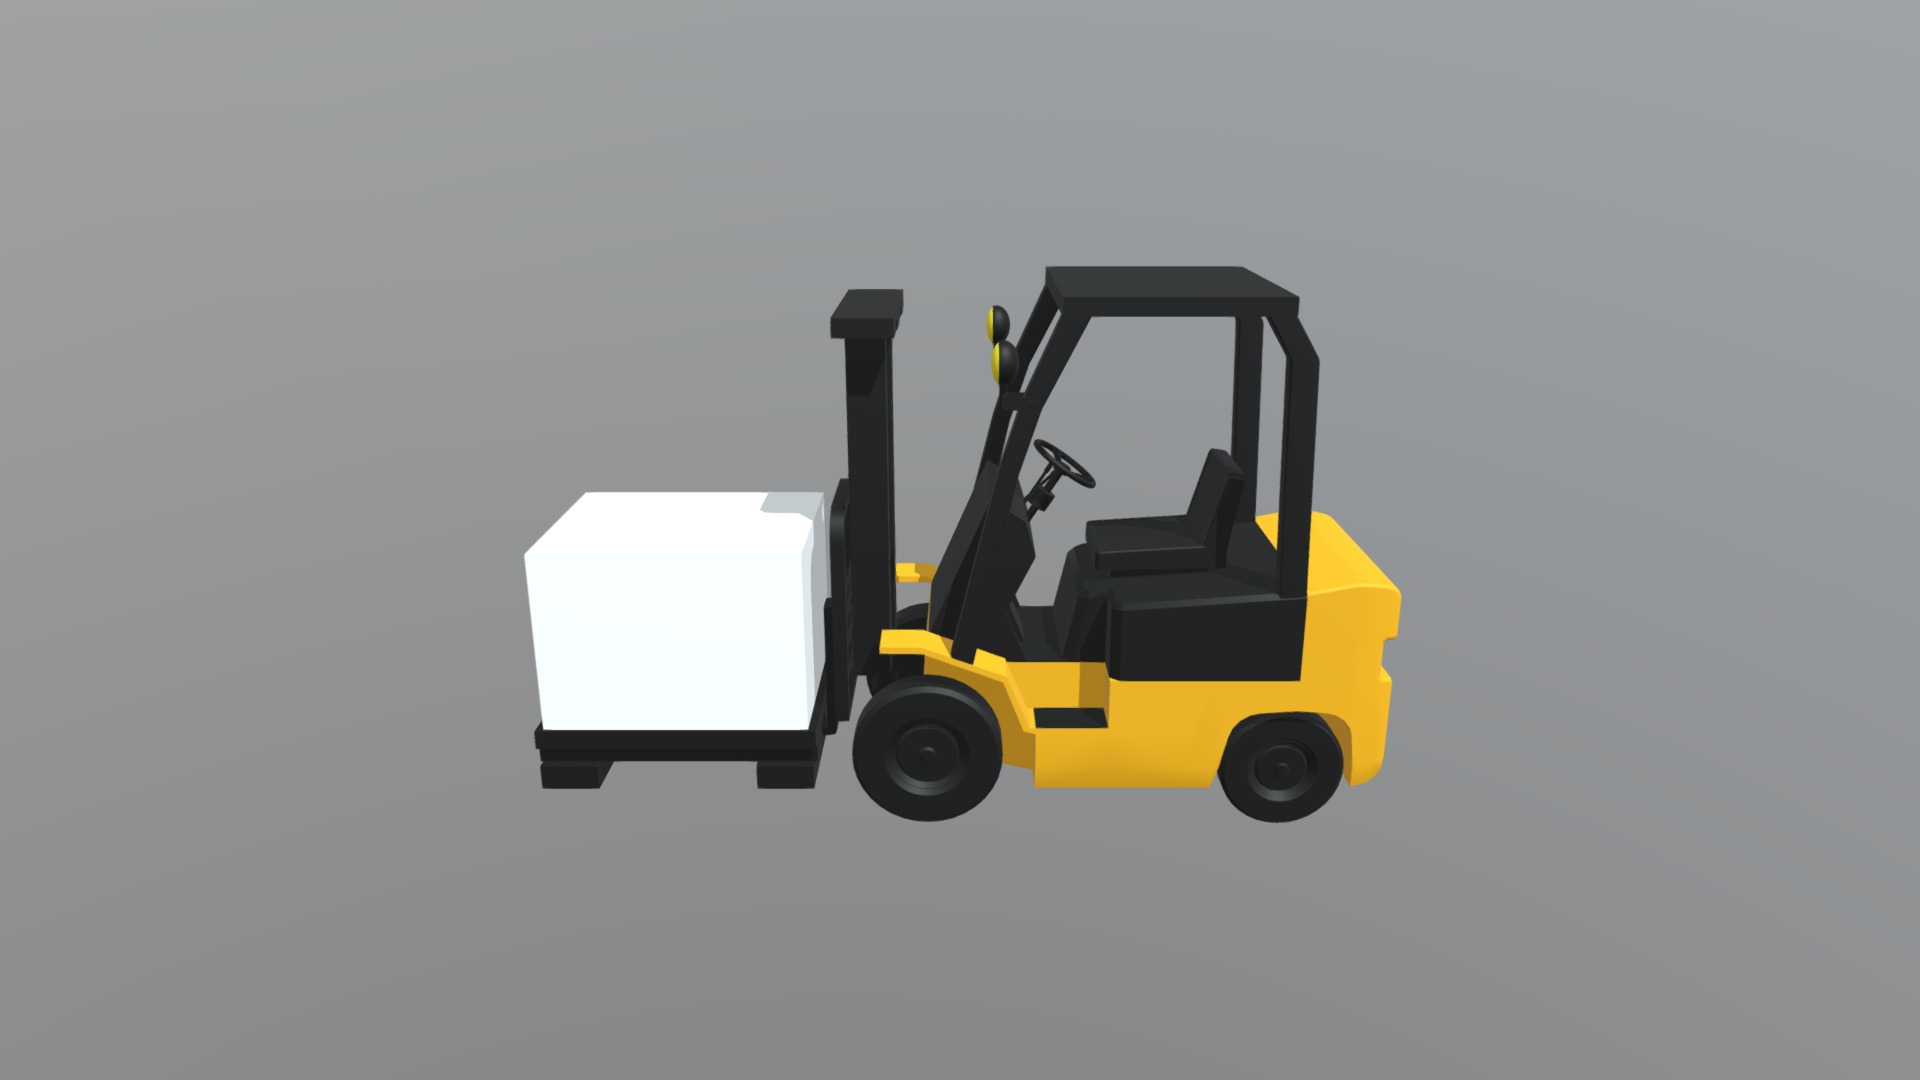 3D model Forklift - This is a 3D model of the Forklift. The 3D model is about a yellow and black forklift.